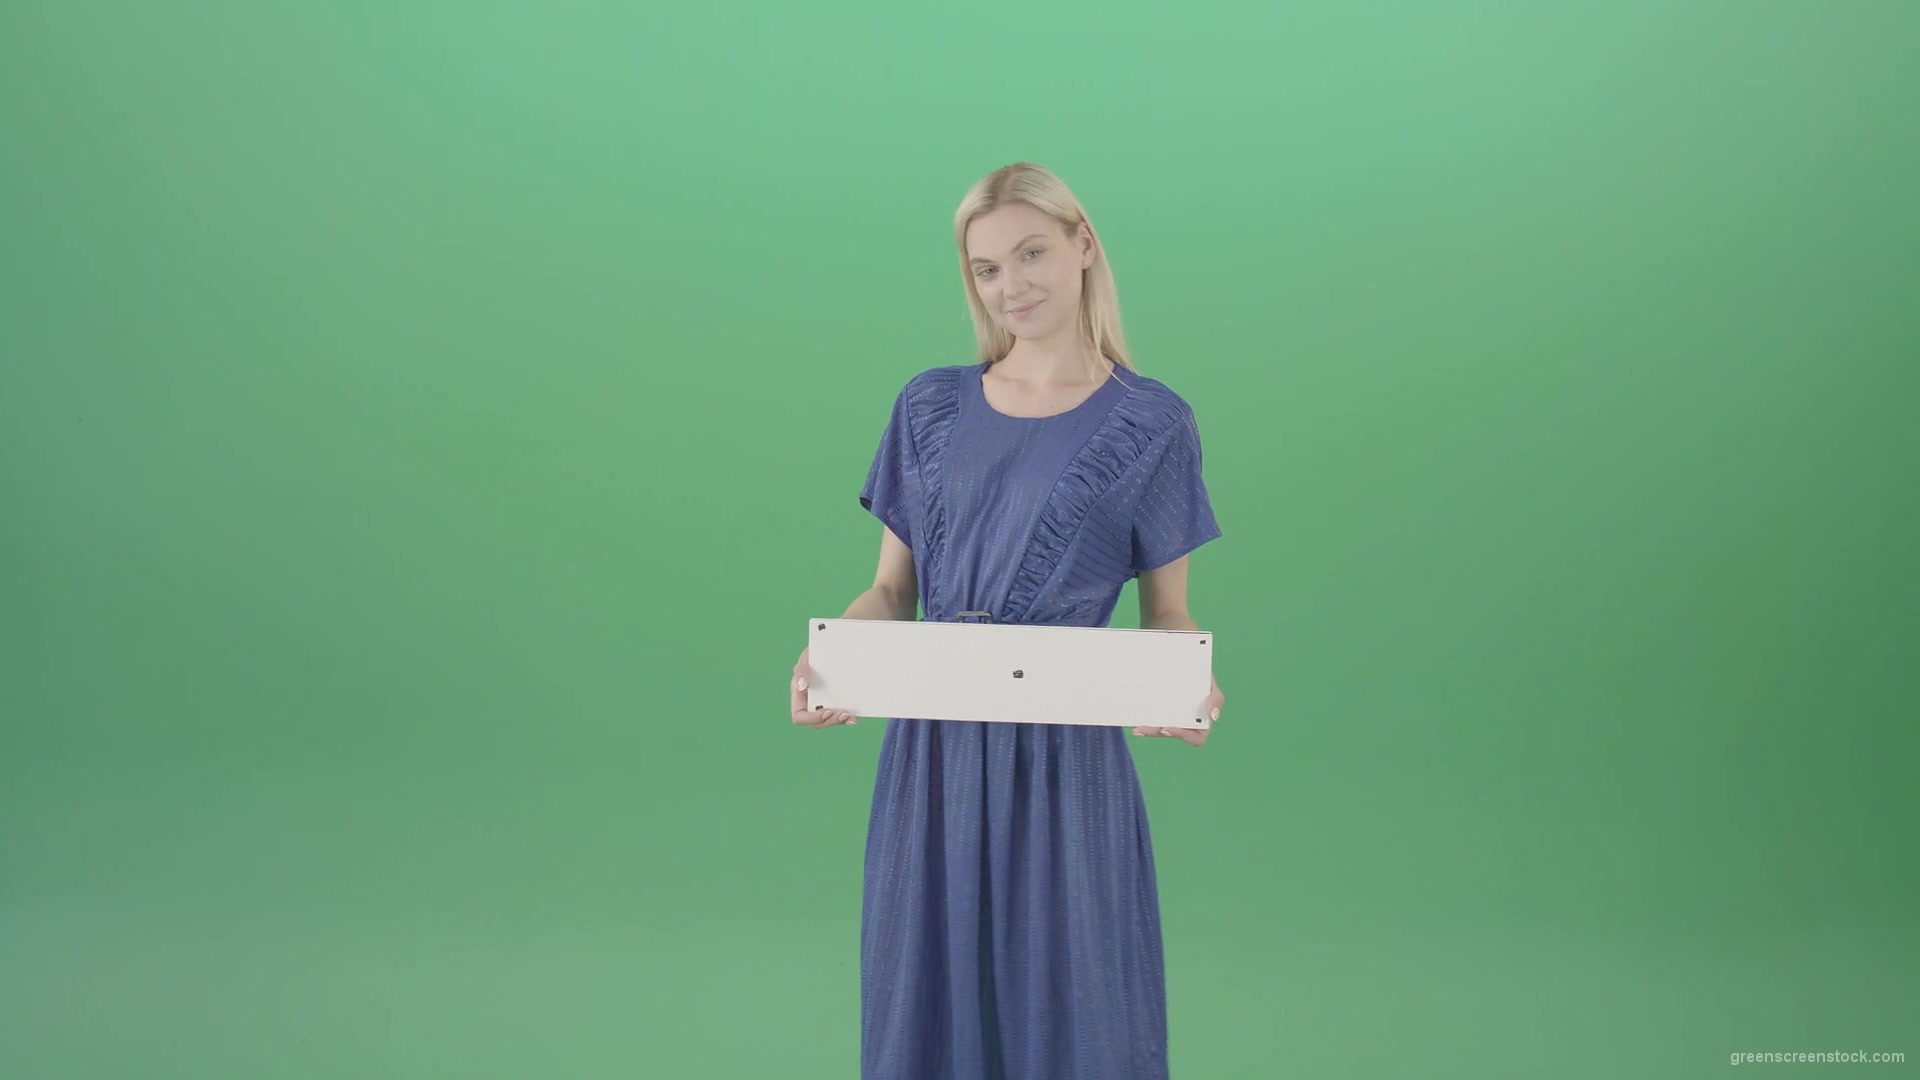 Housewife-in-blue-dress-and-with-text-plane-mockup-posing-isolated-on-Green-Screen-4K-Video-Footage-1-1920_005 Green Screen Stock